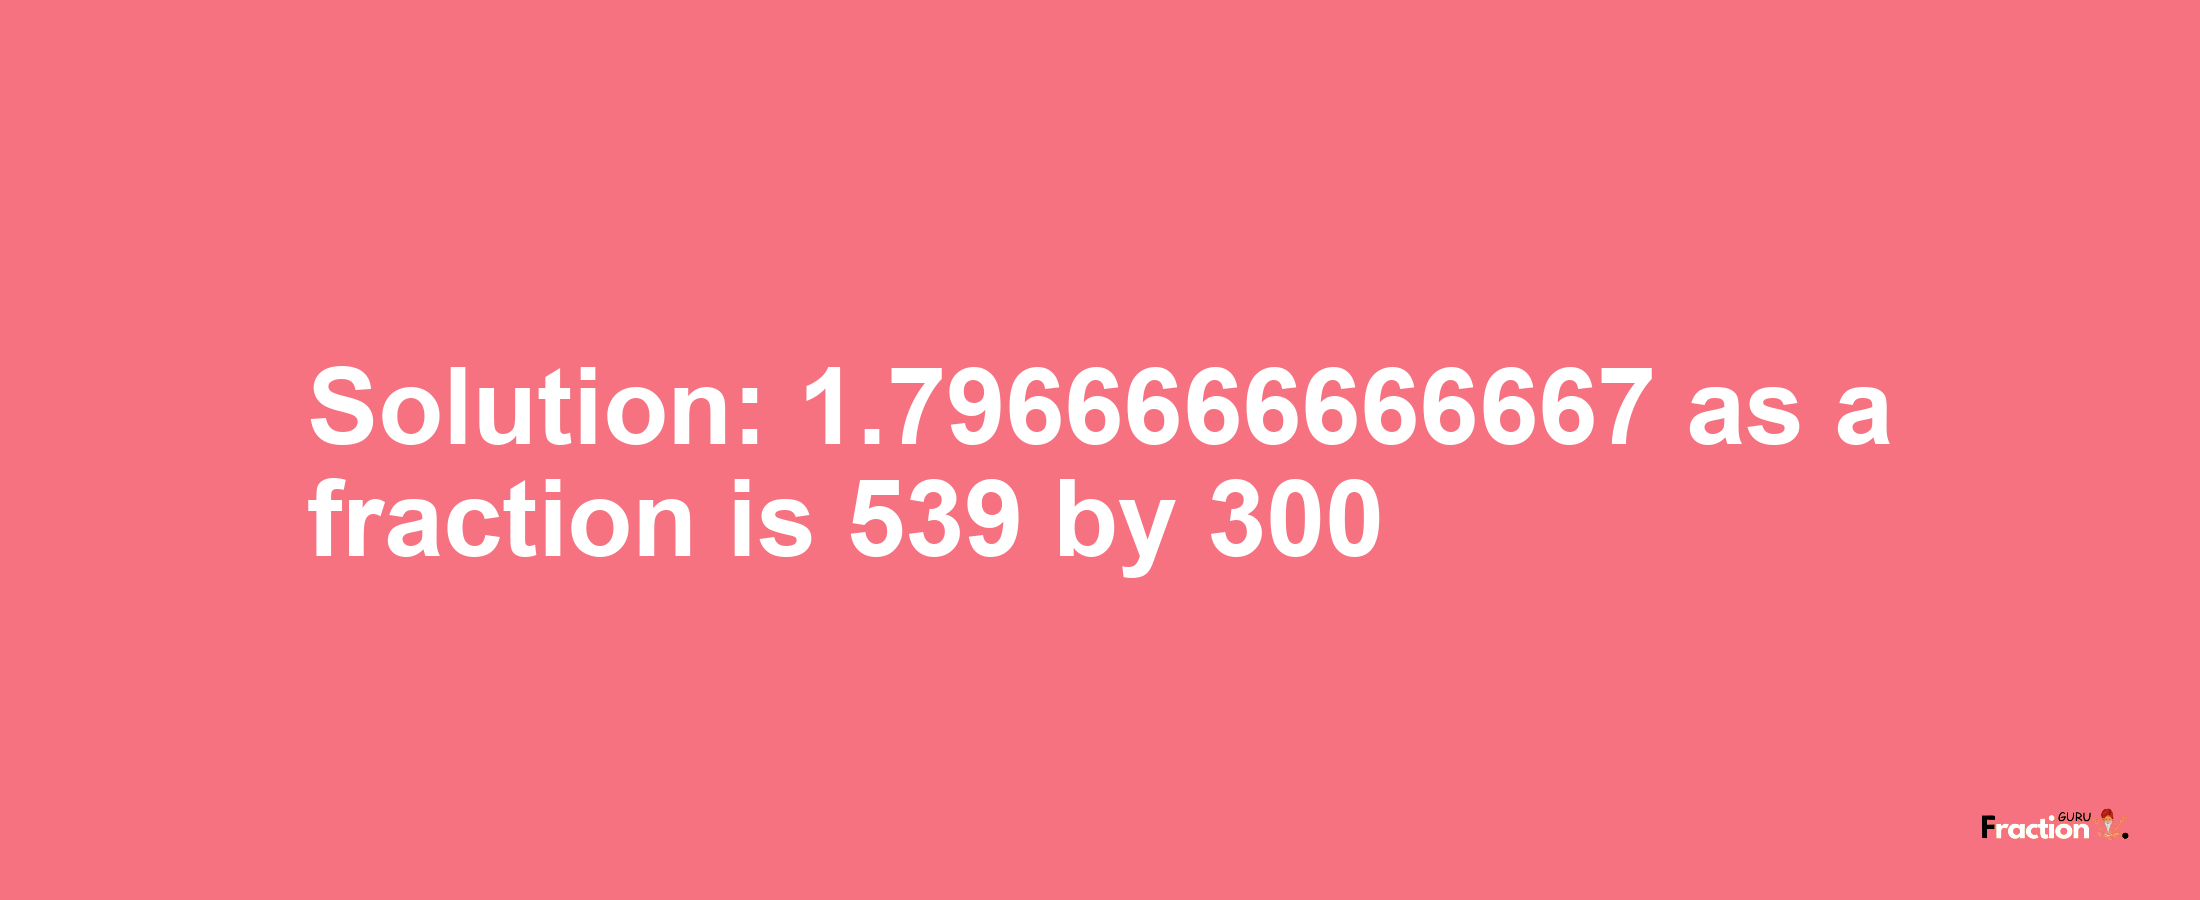 Solution:1.7966666666667 as a fraction is 539/300